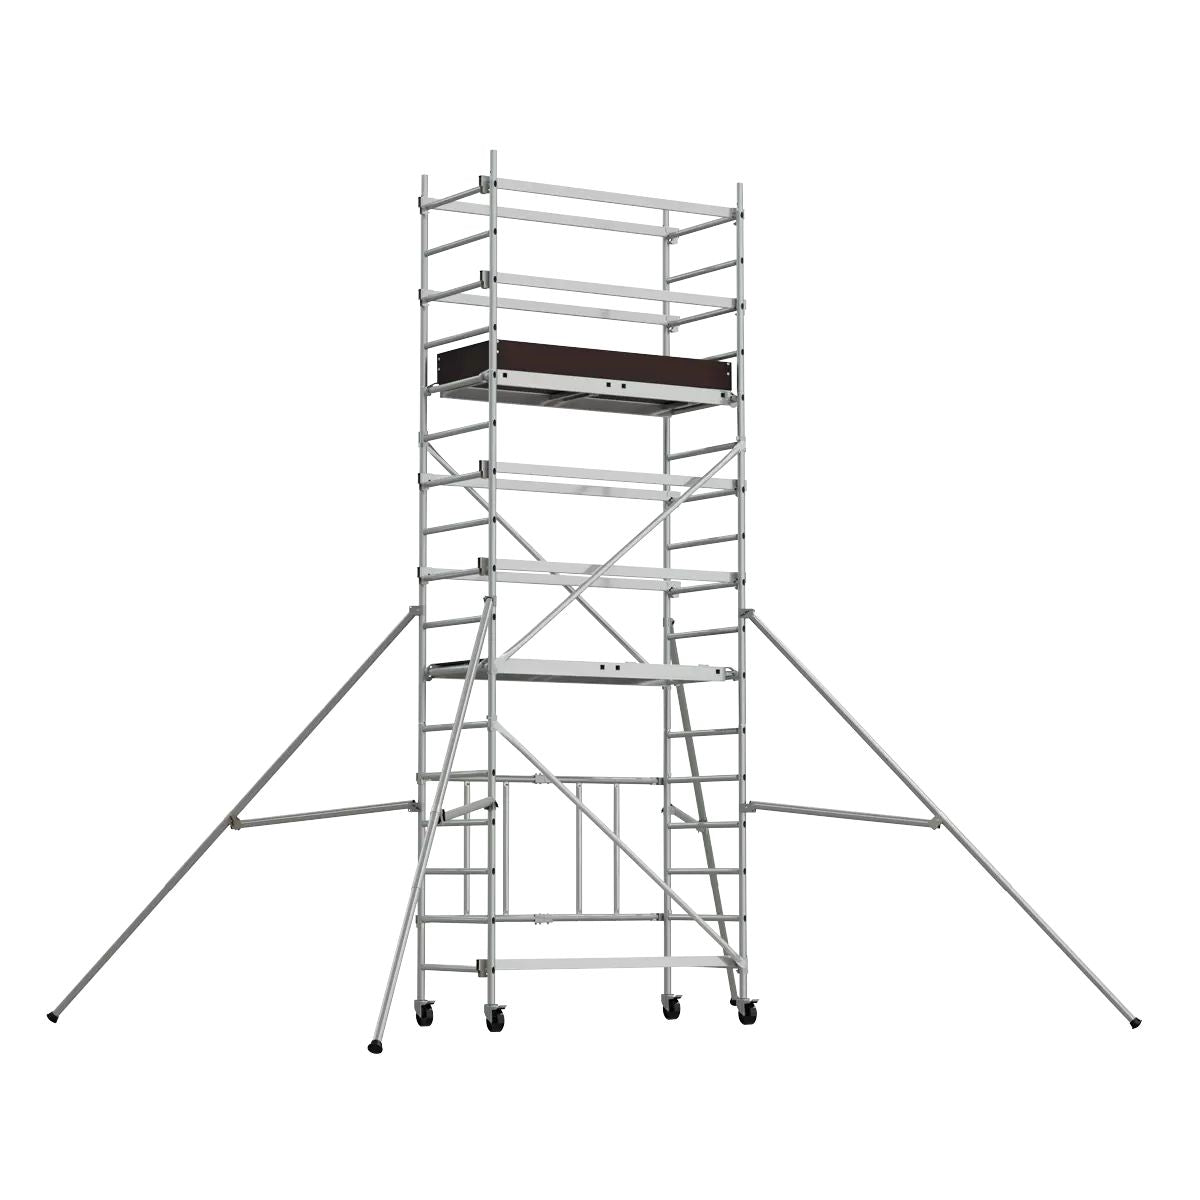 Sealey SSCL3 Platform Scaffold Tower Extension Pack 3